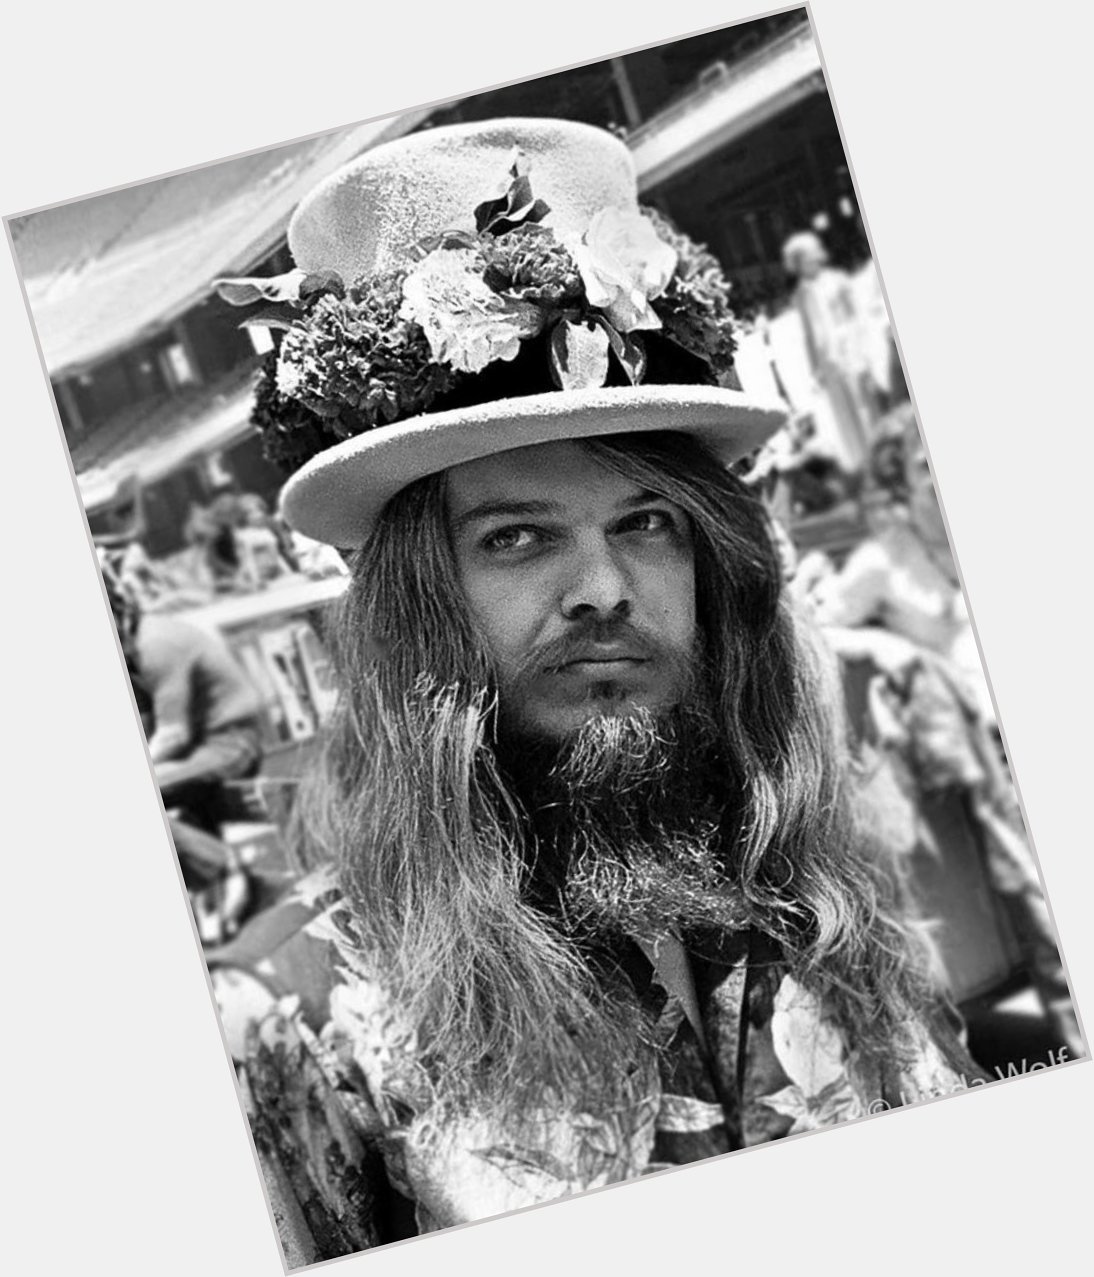 Happy (Heavenly) belated Birthday to Tulsa s own, Leon Russell. He would be 80 years old. 2Apr1942 - 13Nov2016 